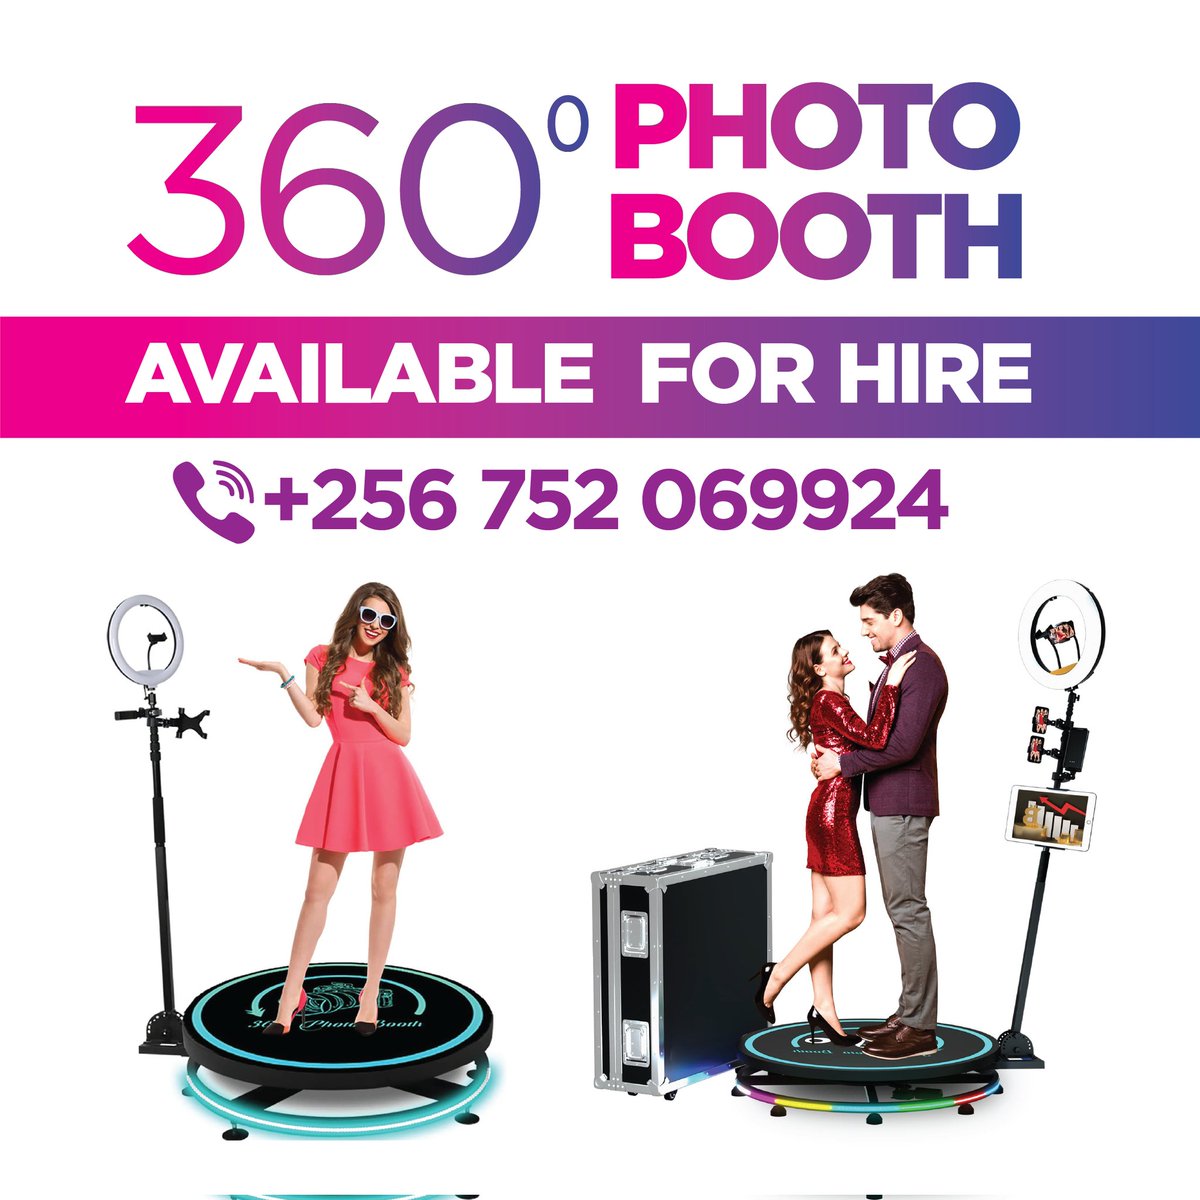 📸 Unleash the Wow Factor with Our 360 PhotoBooth! 🌐✨ Perfect for weddings, parties, and all events. Book Now for unforgettable memories! 🎉📷 #360PhotoBooth #EventPhotography

Available for hire on All Events.....  
☎️+256752069924 Uganda Rwanda Kenya Tanzania